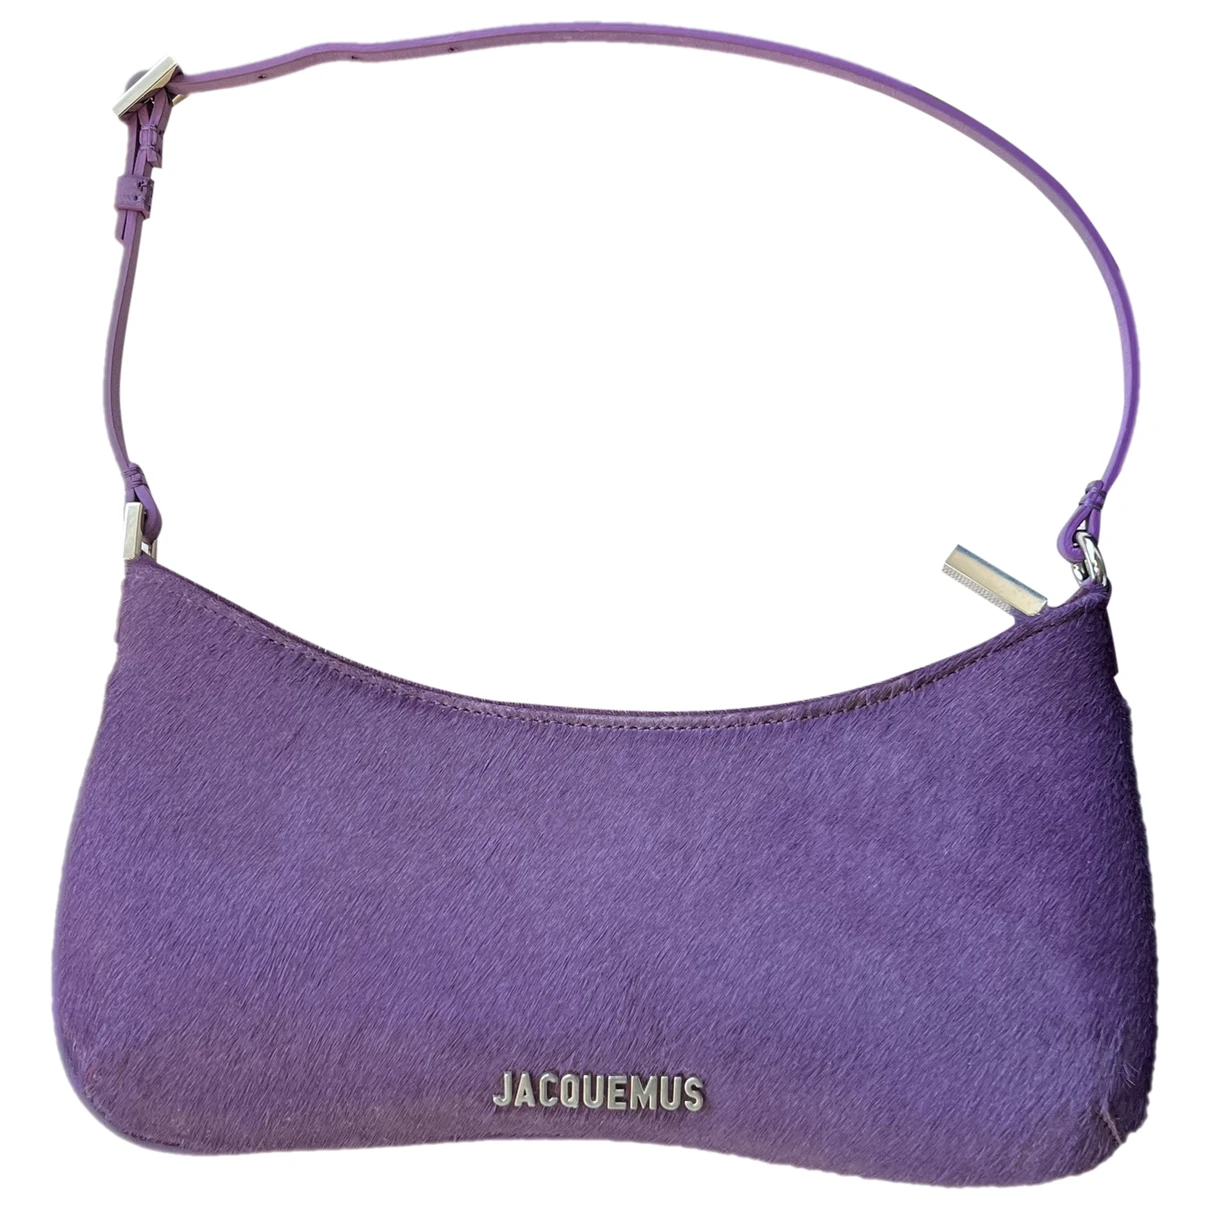 Pre-owned Jacquemus Pony-style Calfskin Handbag In Purple